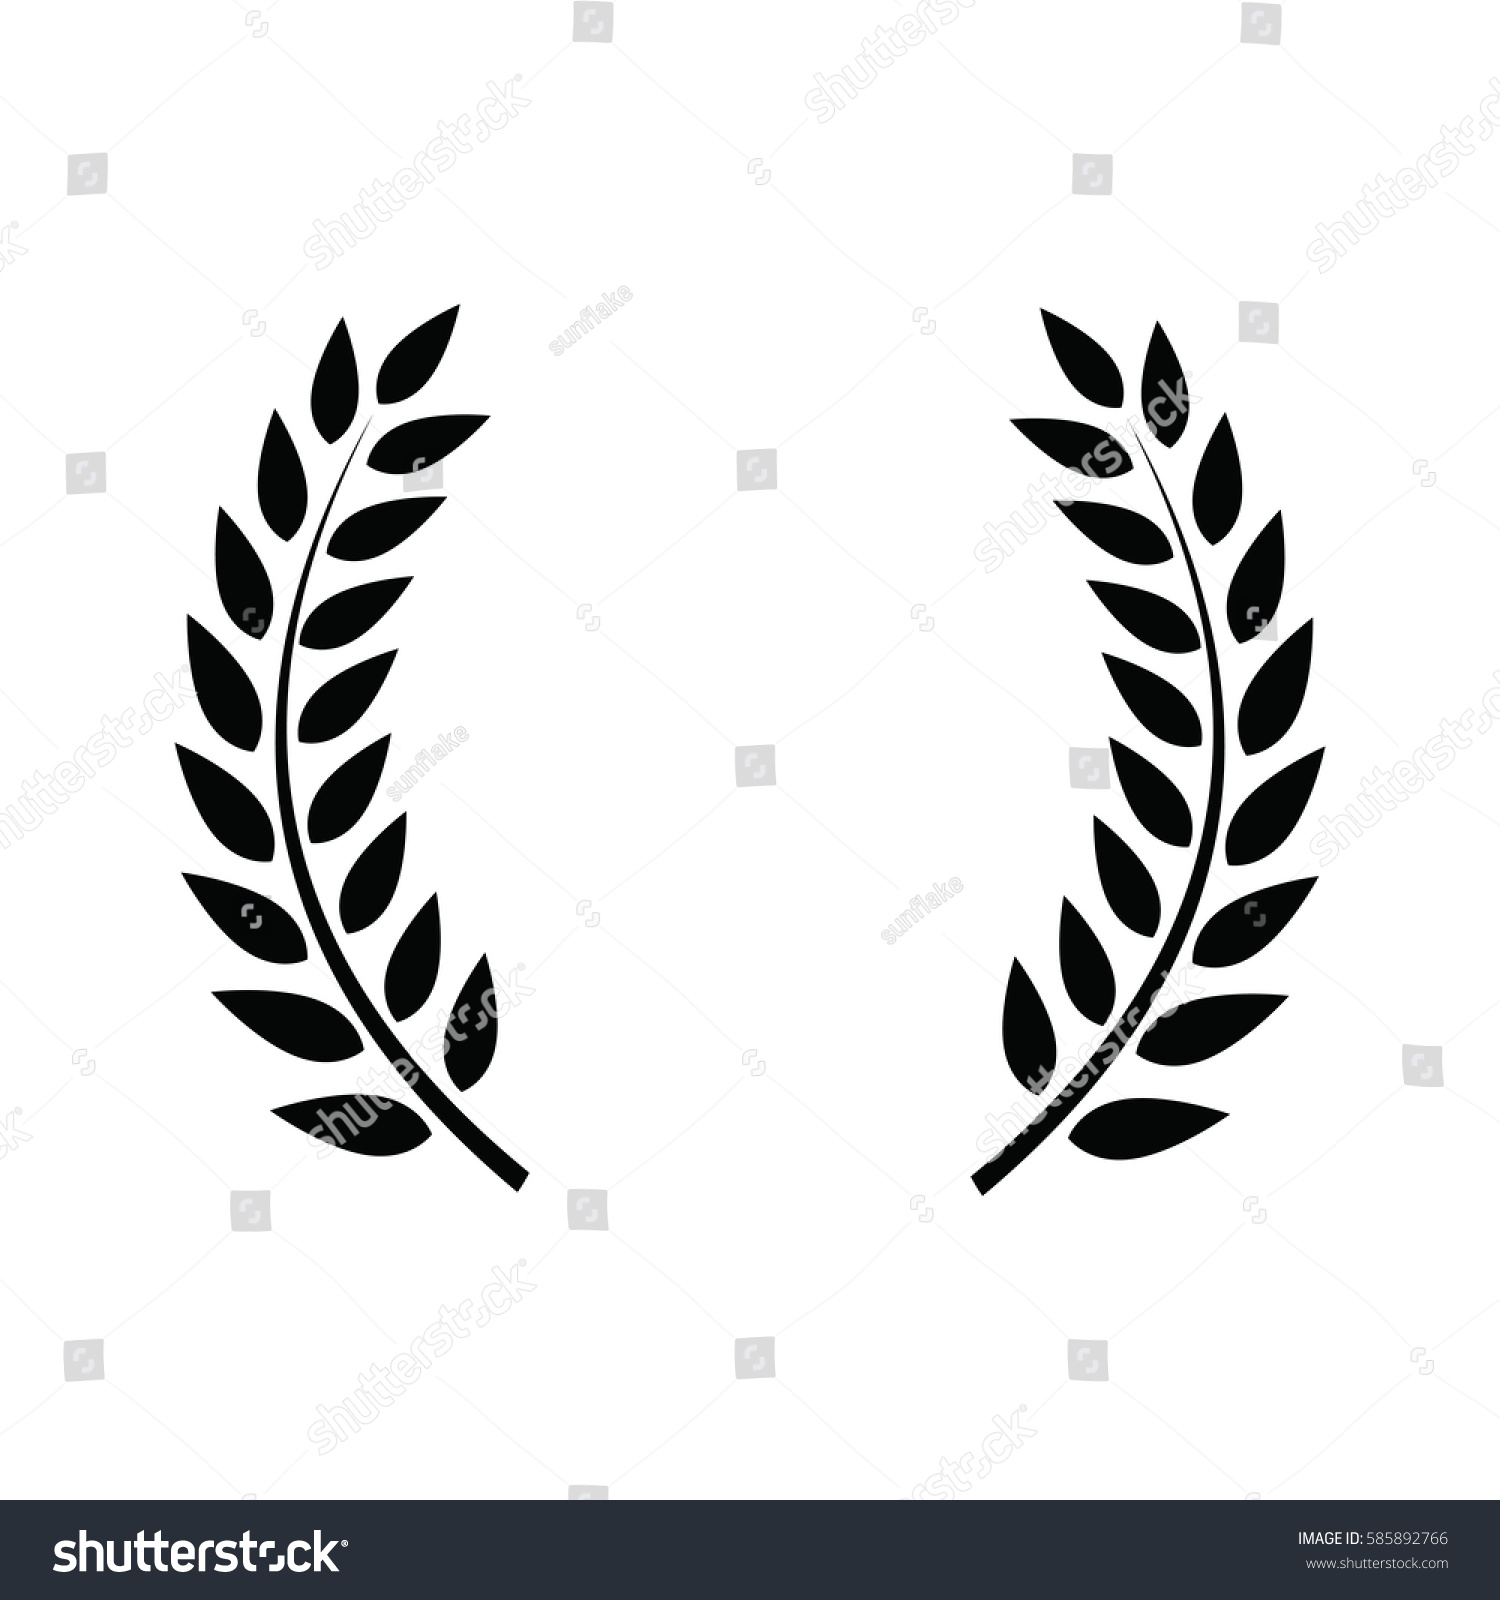 SVG of Laurel wreath - symbol of victory and power. Flat icon for apps and websites svg